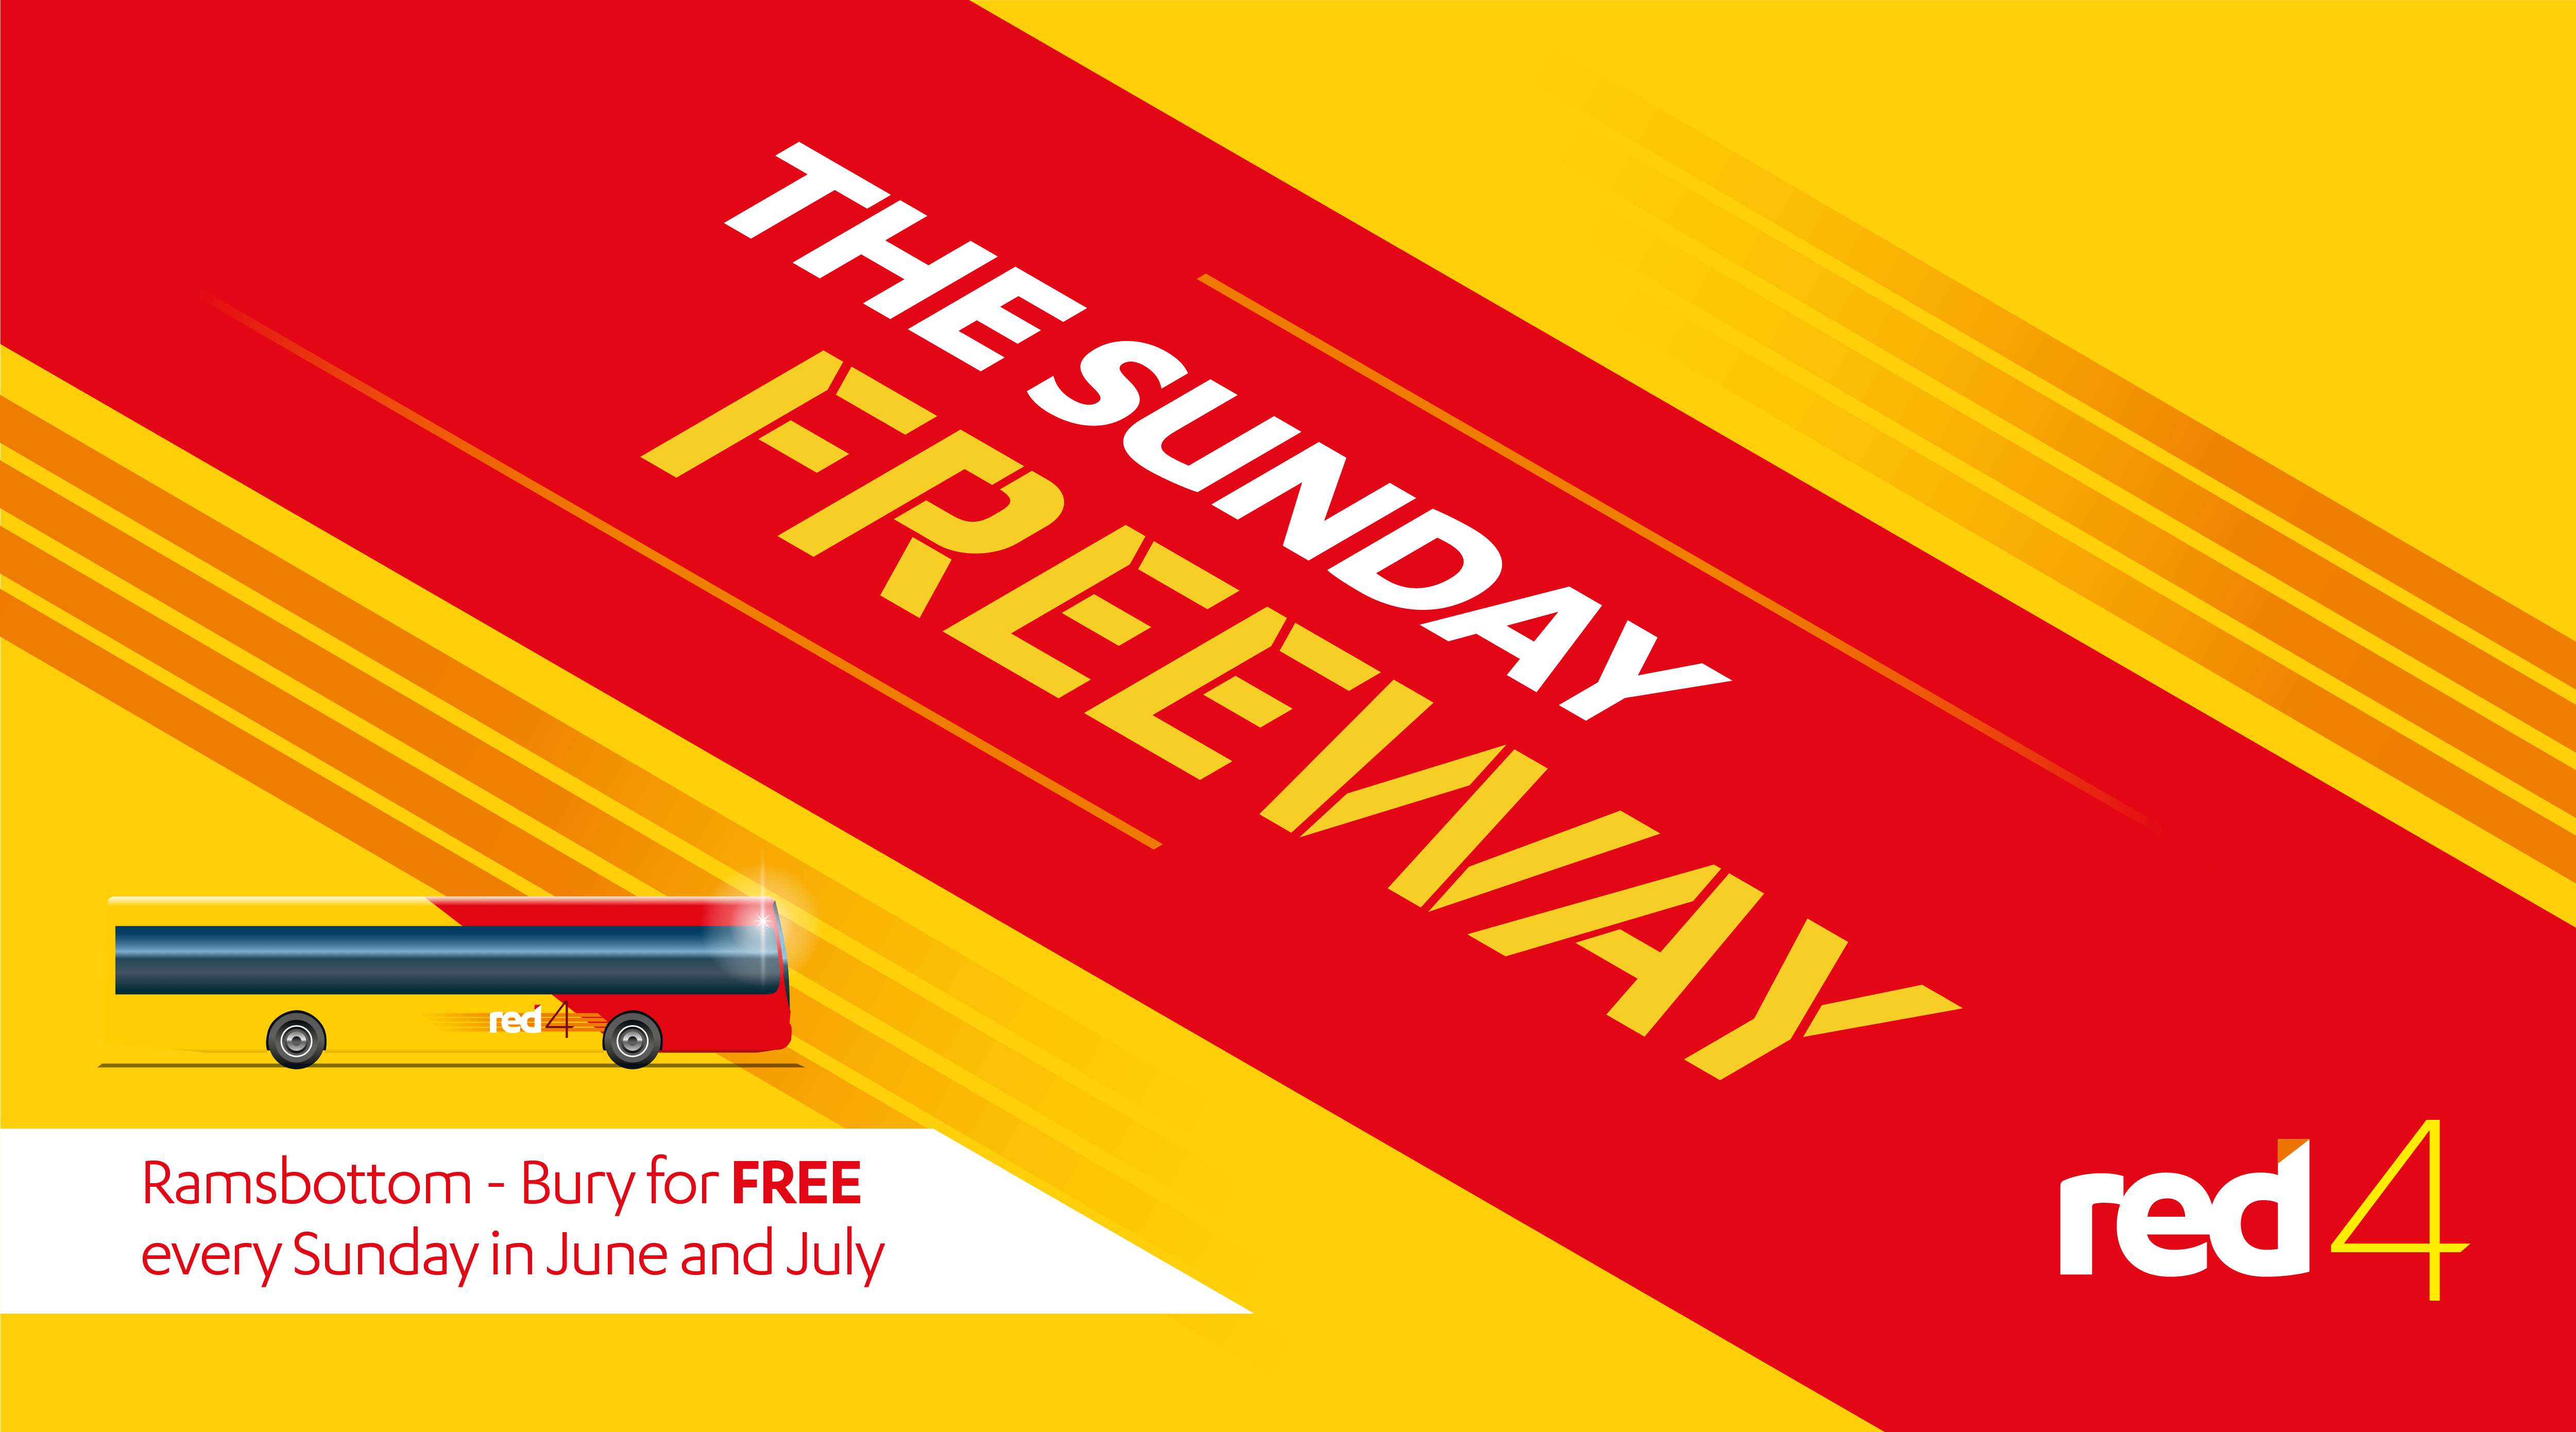 Ride Red4 for free with the Sunday Freeway